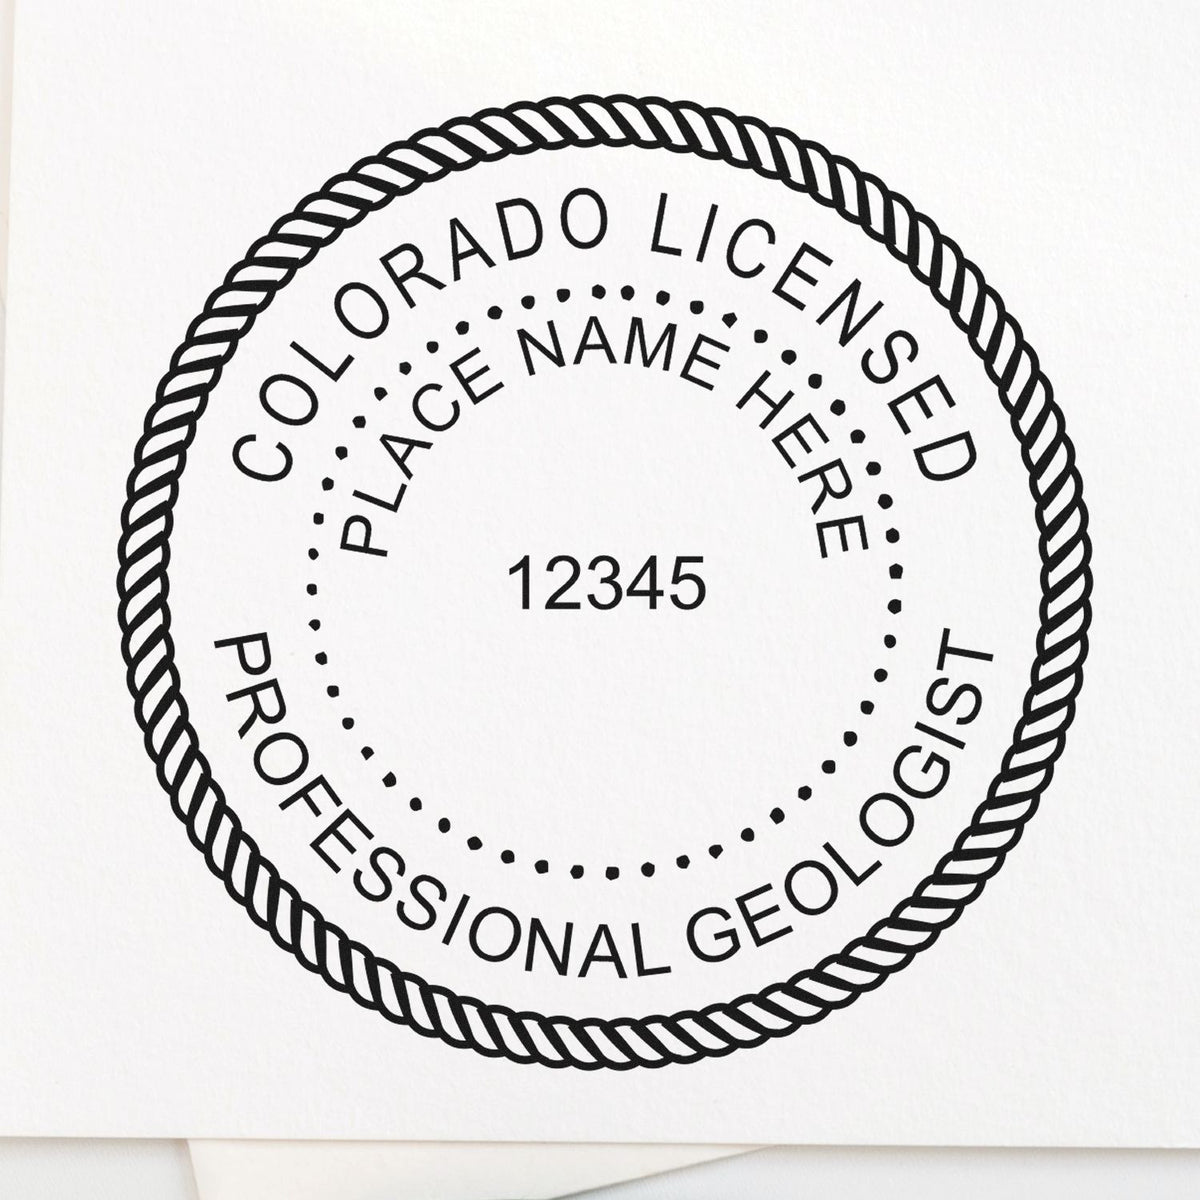 A photograph of the Colorado Professional Geologist Seal Stamp stamp impression reveals a vivid, professional image of the on paper.